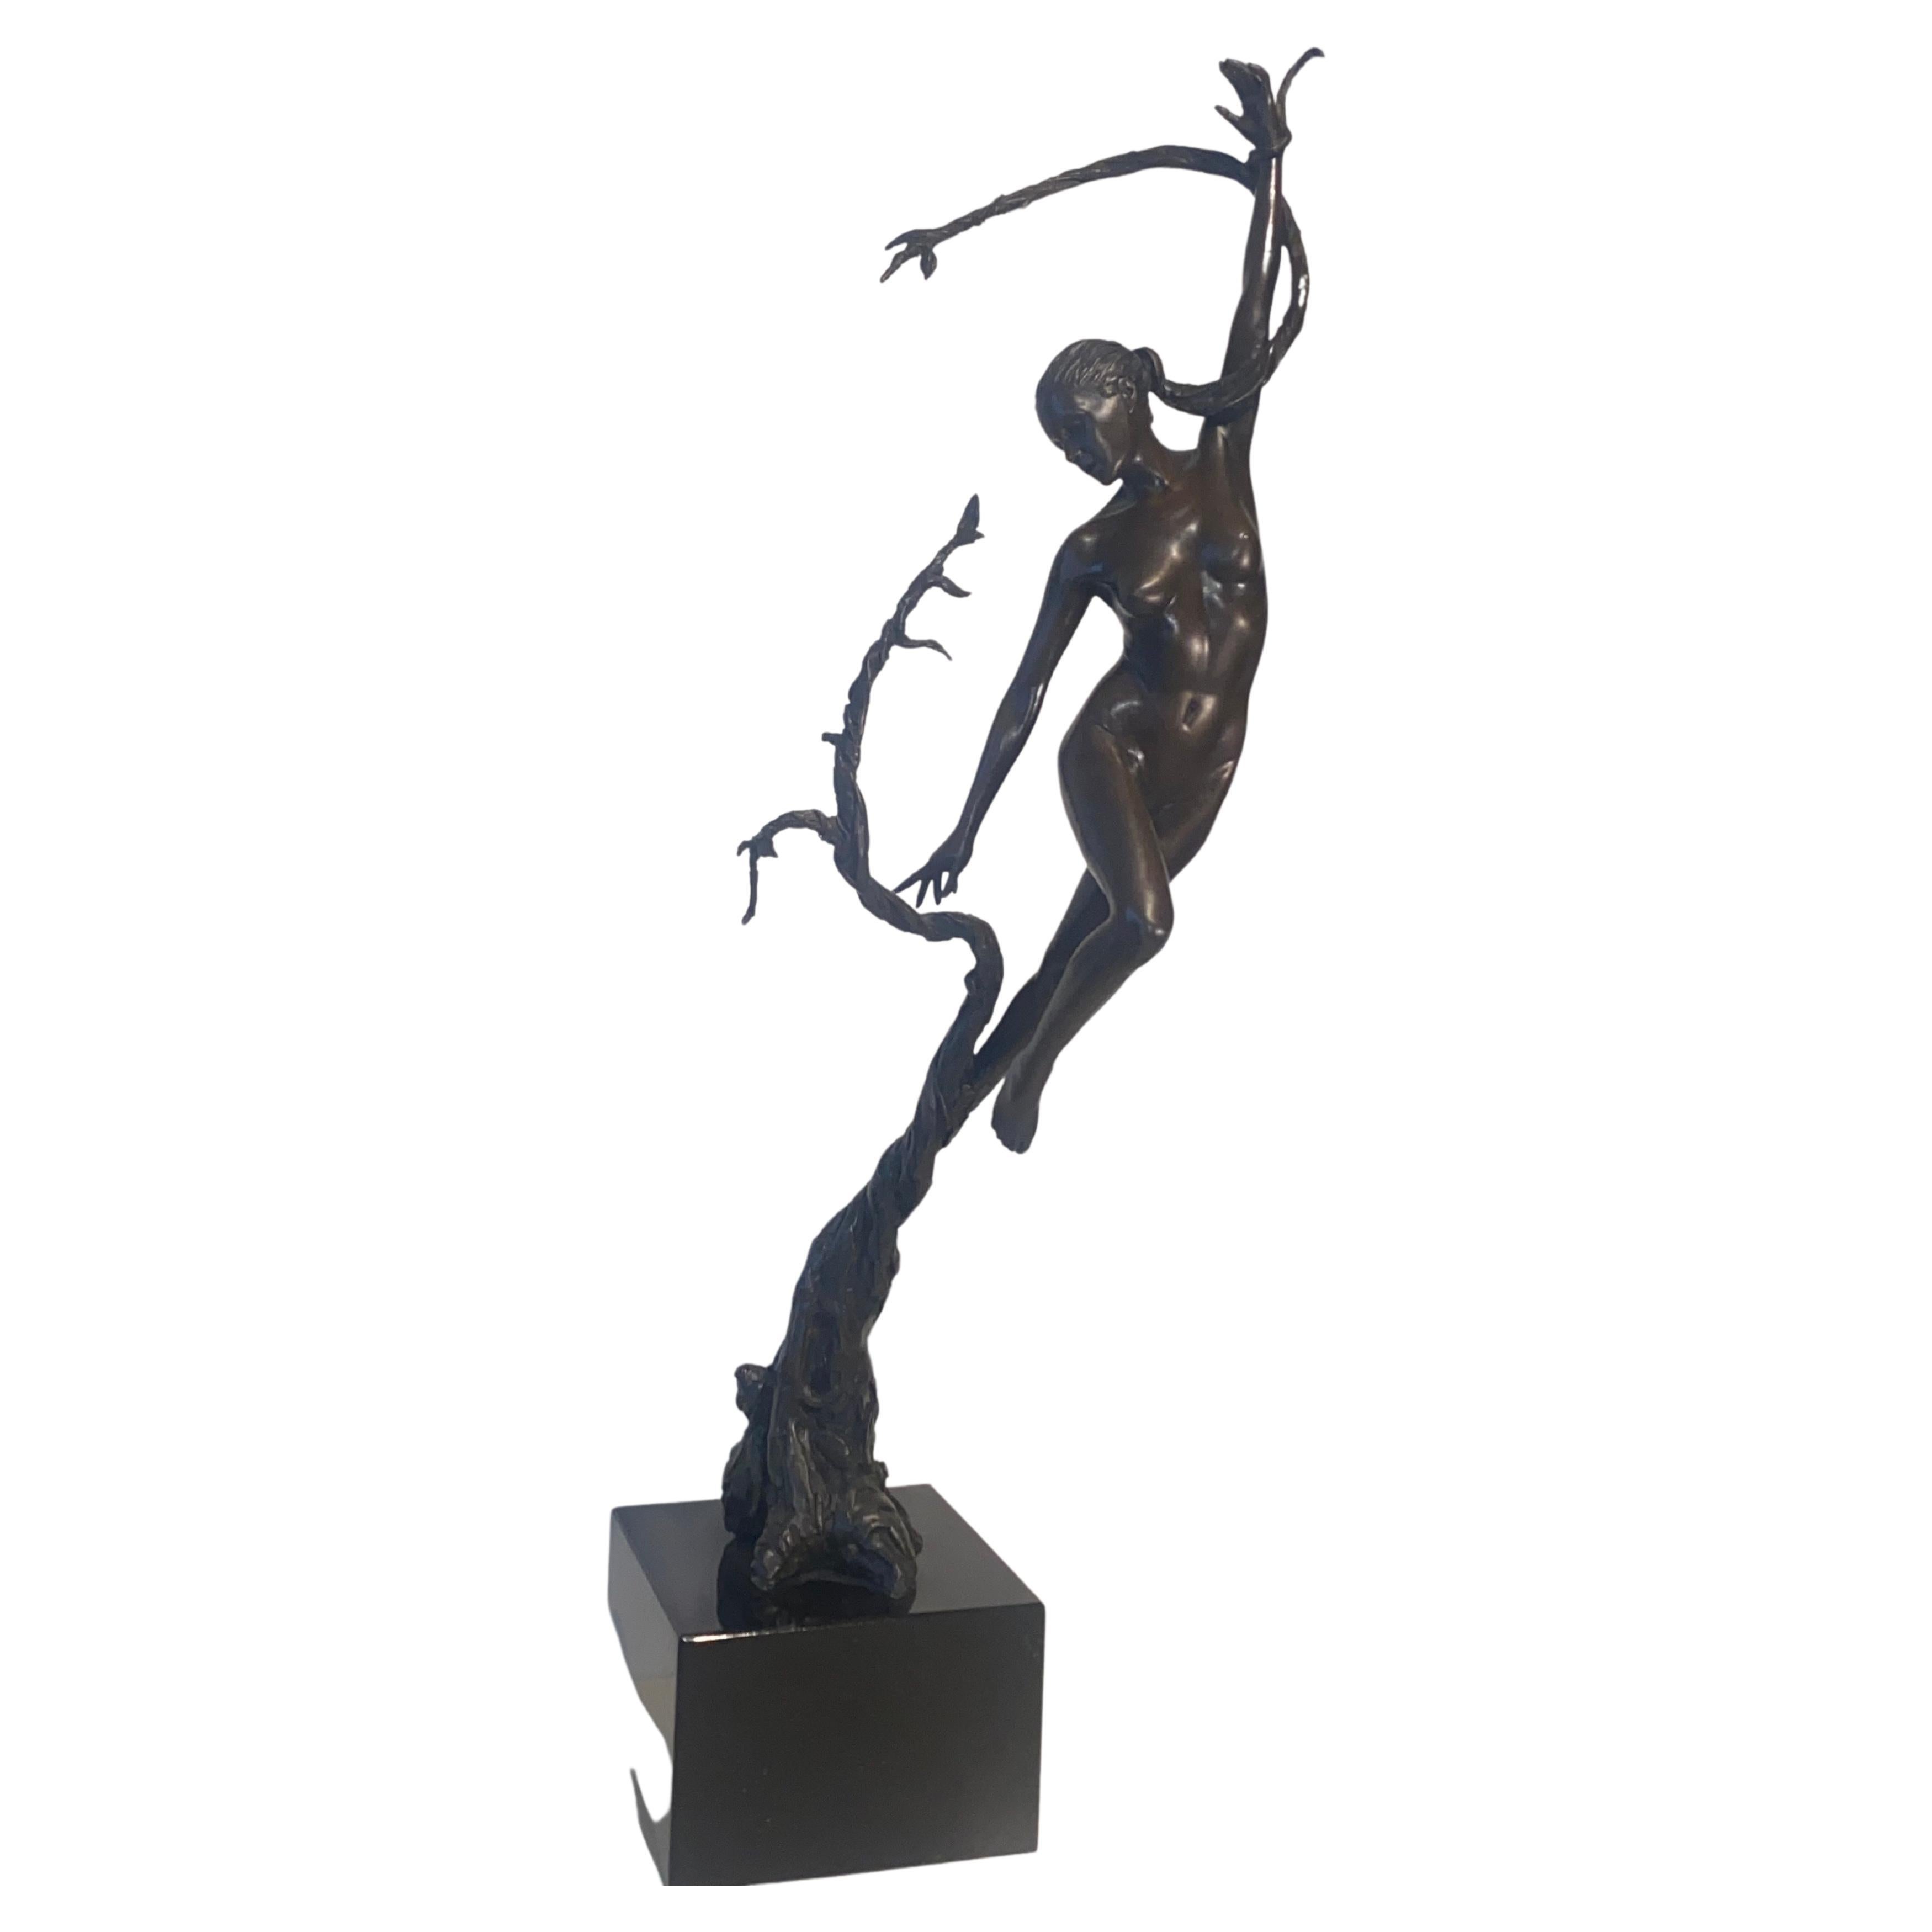 Neil Welch Nature’s Grace A Large Limited Edition of 25 Bronze Sculpture 1/25 For Sale 2